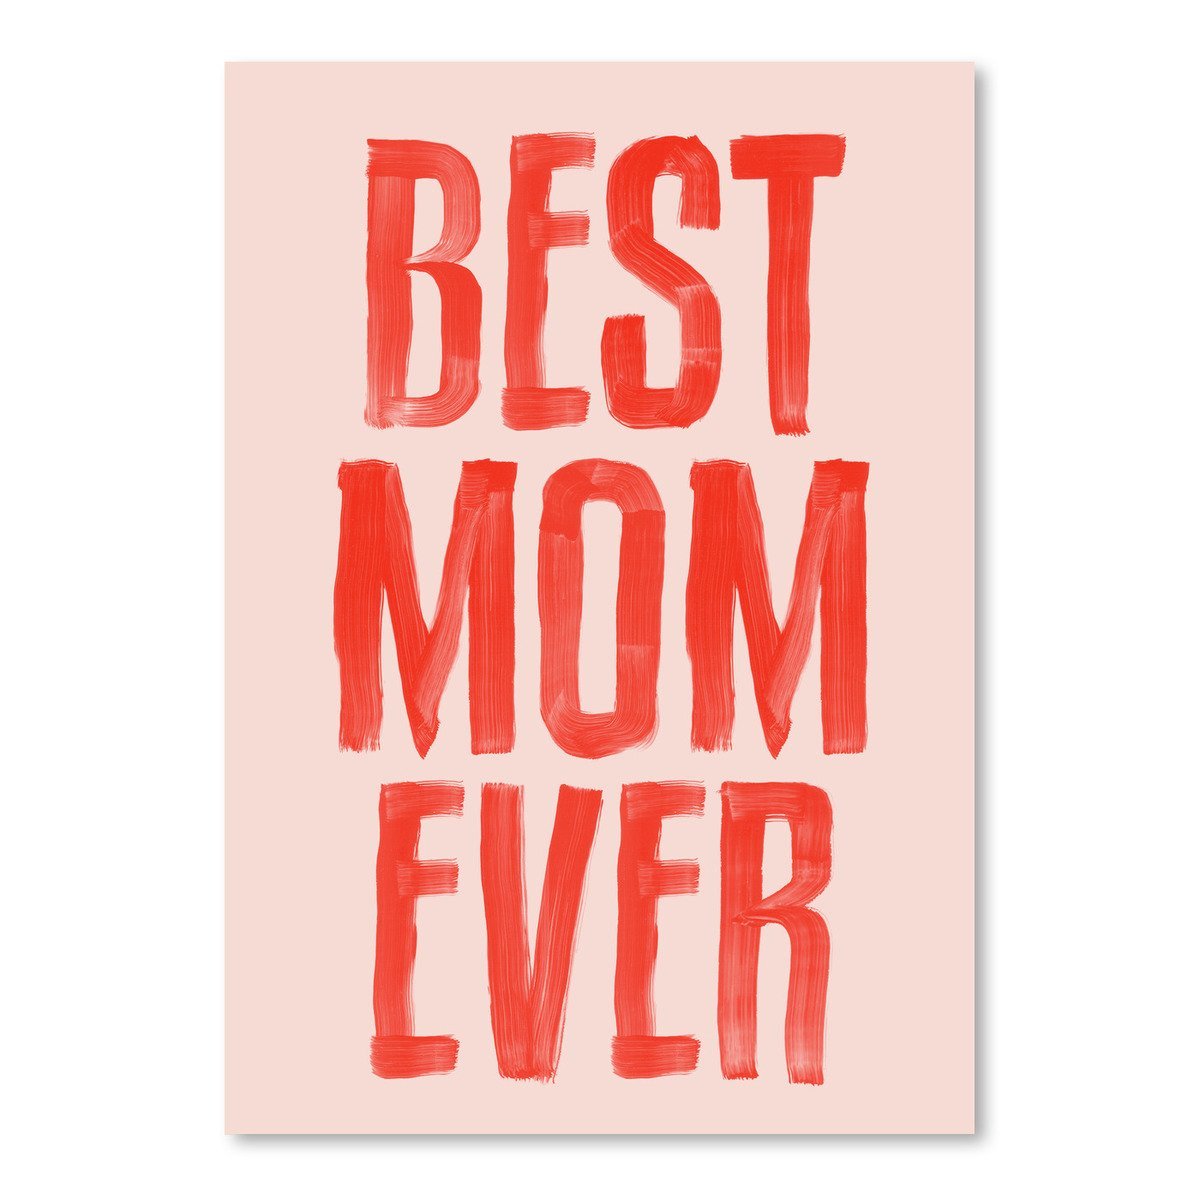 Best Mom Ever C by Motivated Type - Art Print - Americanflat